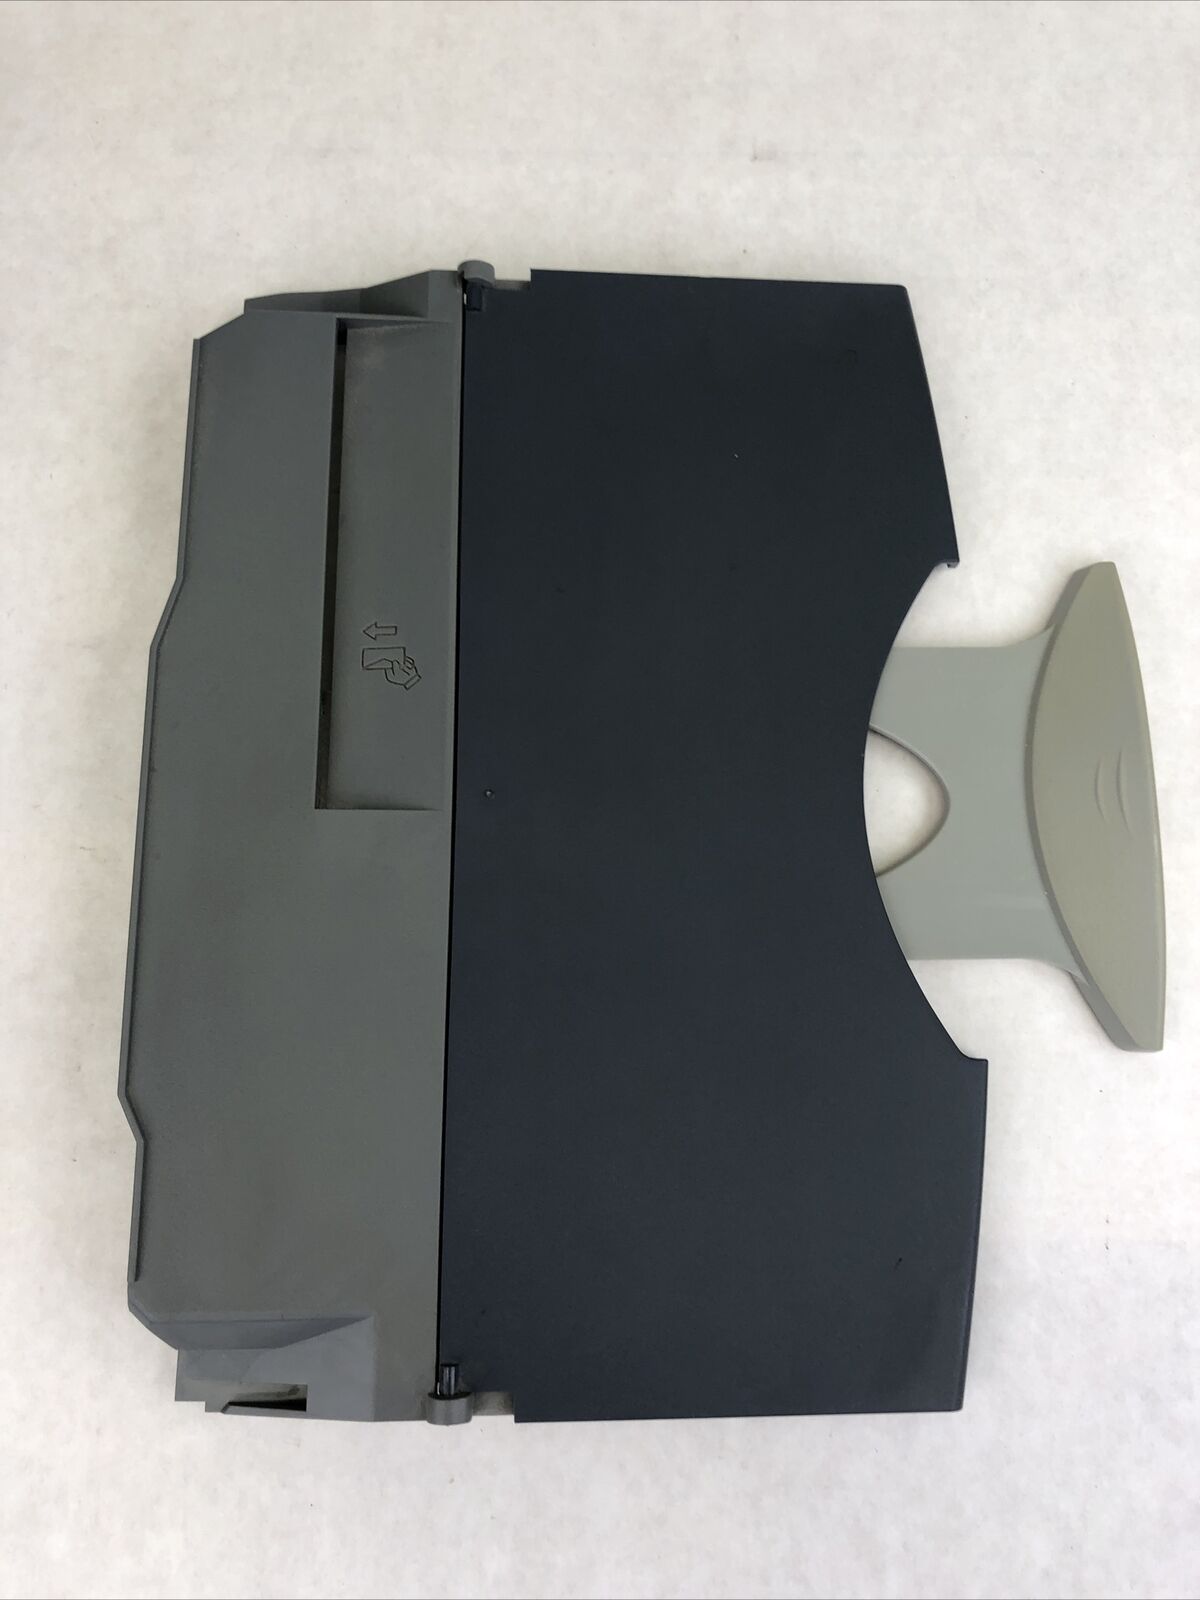 Replacement HP PSC 750 Tray